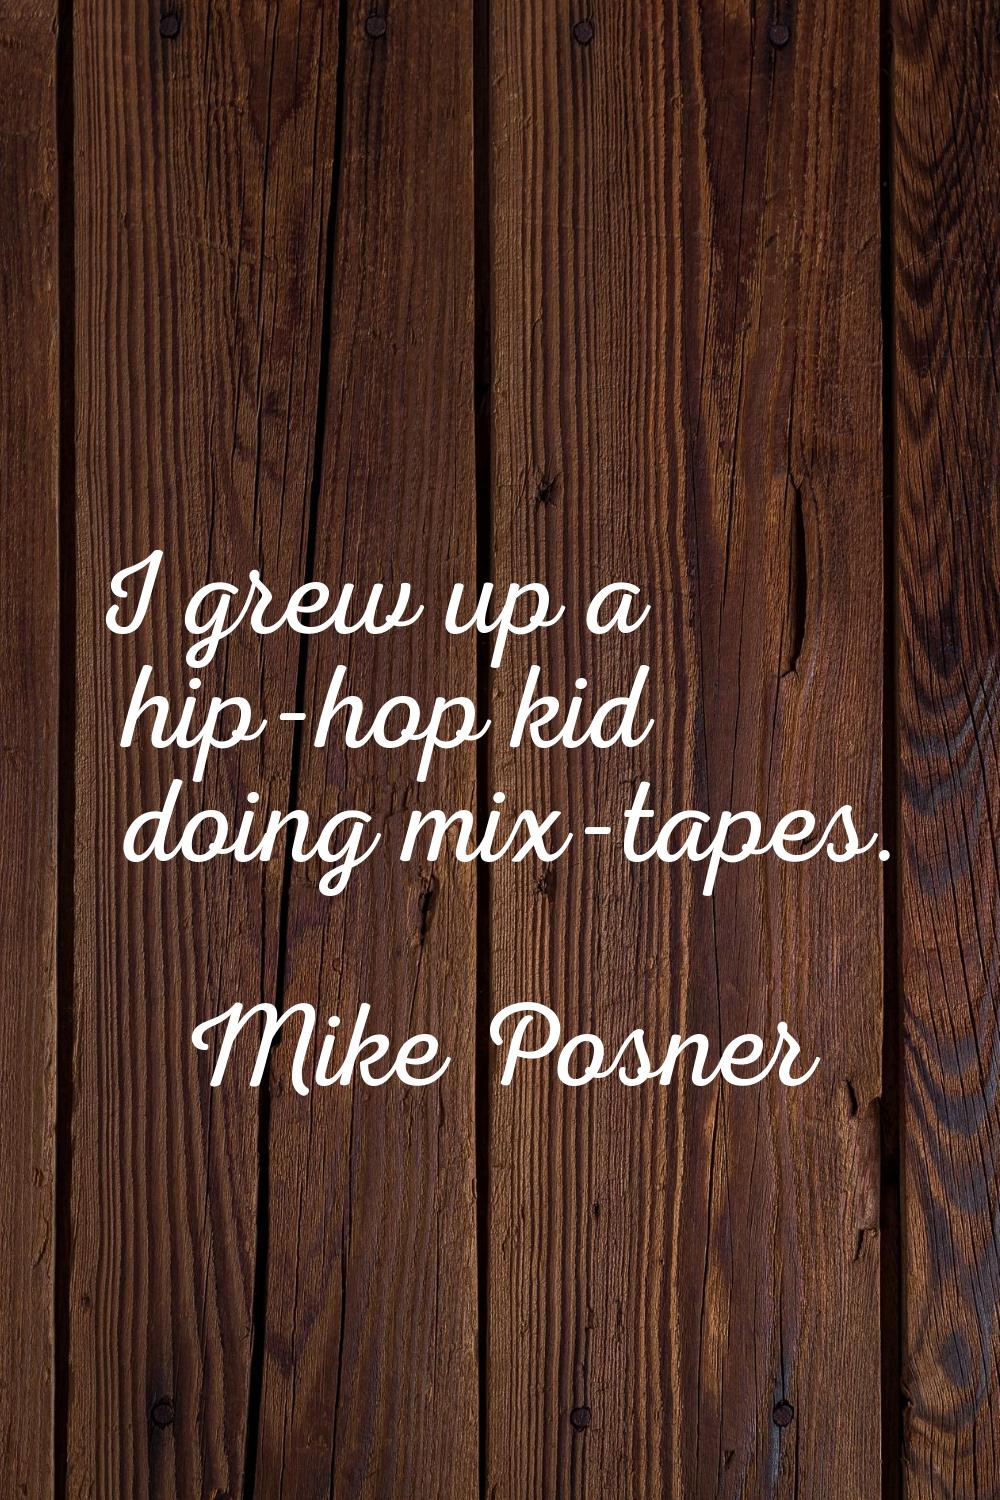 I grew up a hip-hop kid doing mix-tapes.